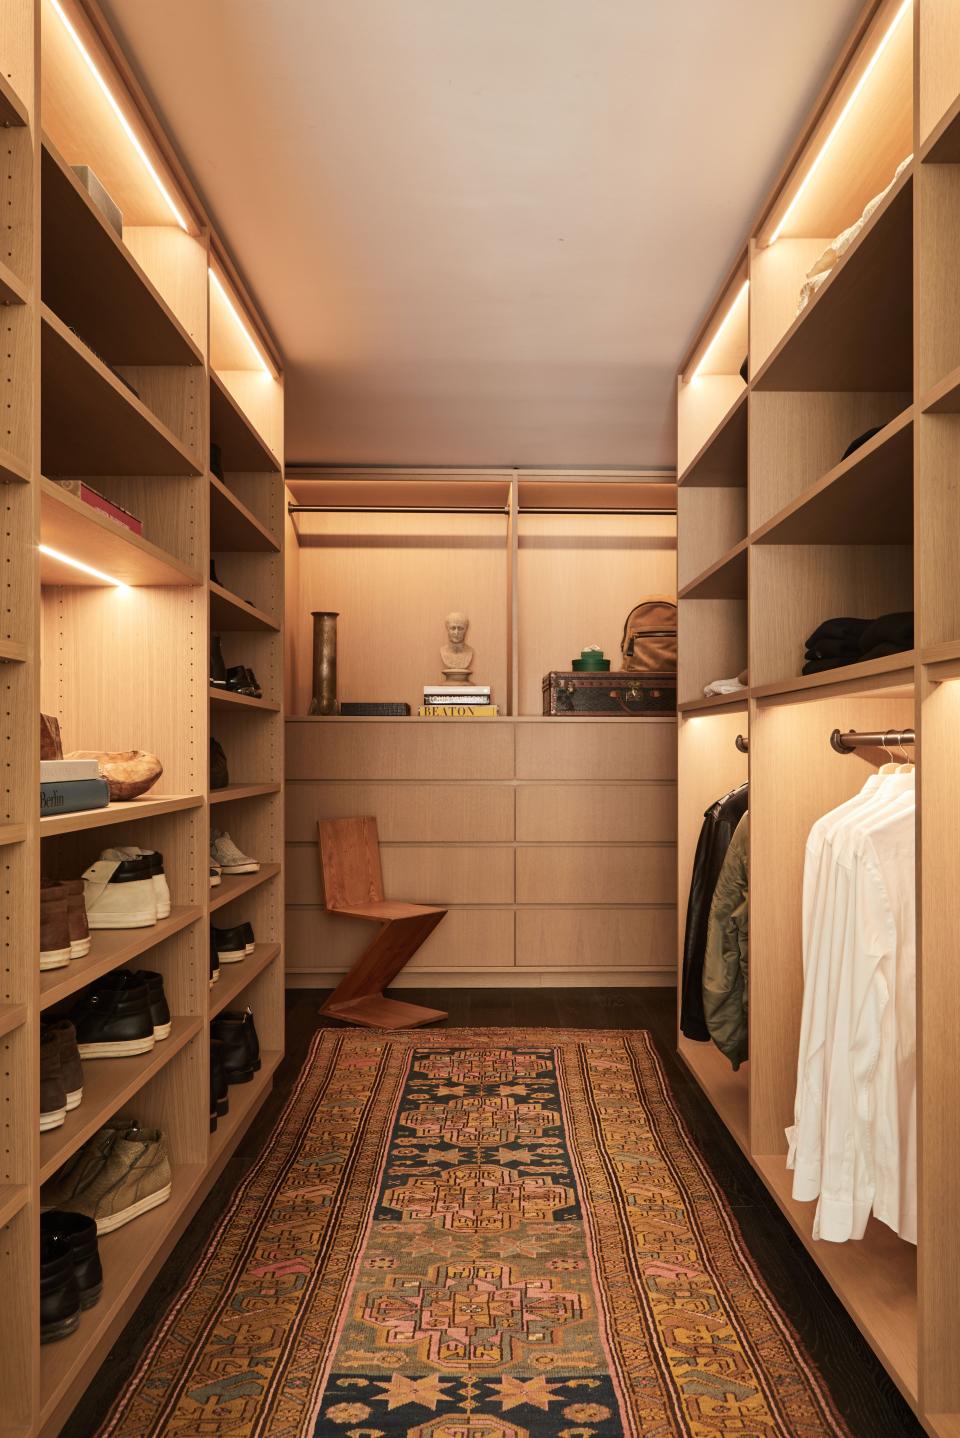 A few pieces of furniture and accessories—such as the Zig Zag chair by Gerrit Rietveld, the cast bronze vase by Rick Owens, the cast marble bust of a man, and the vintage Isfahan Persian handmade wool and silk rug—adorn the walk-in closet, making it both functional and stylish.